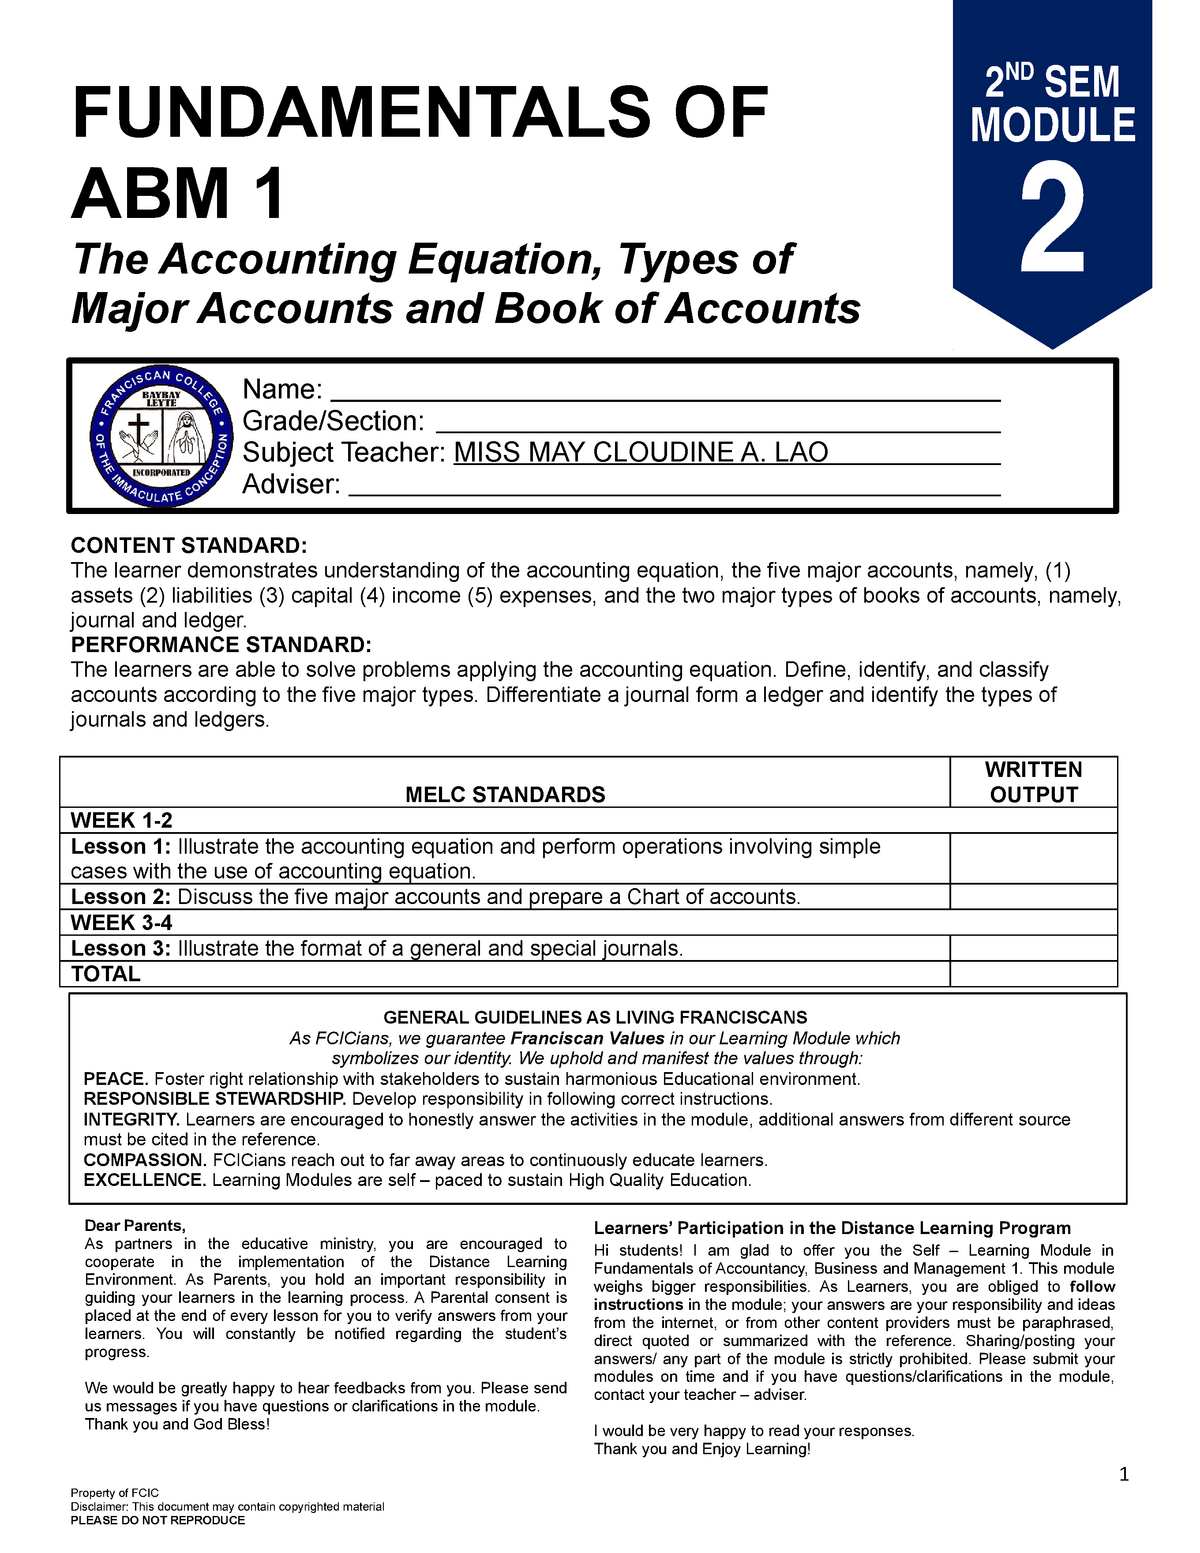 related coursework in abm